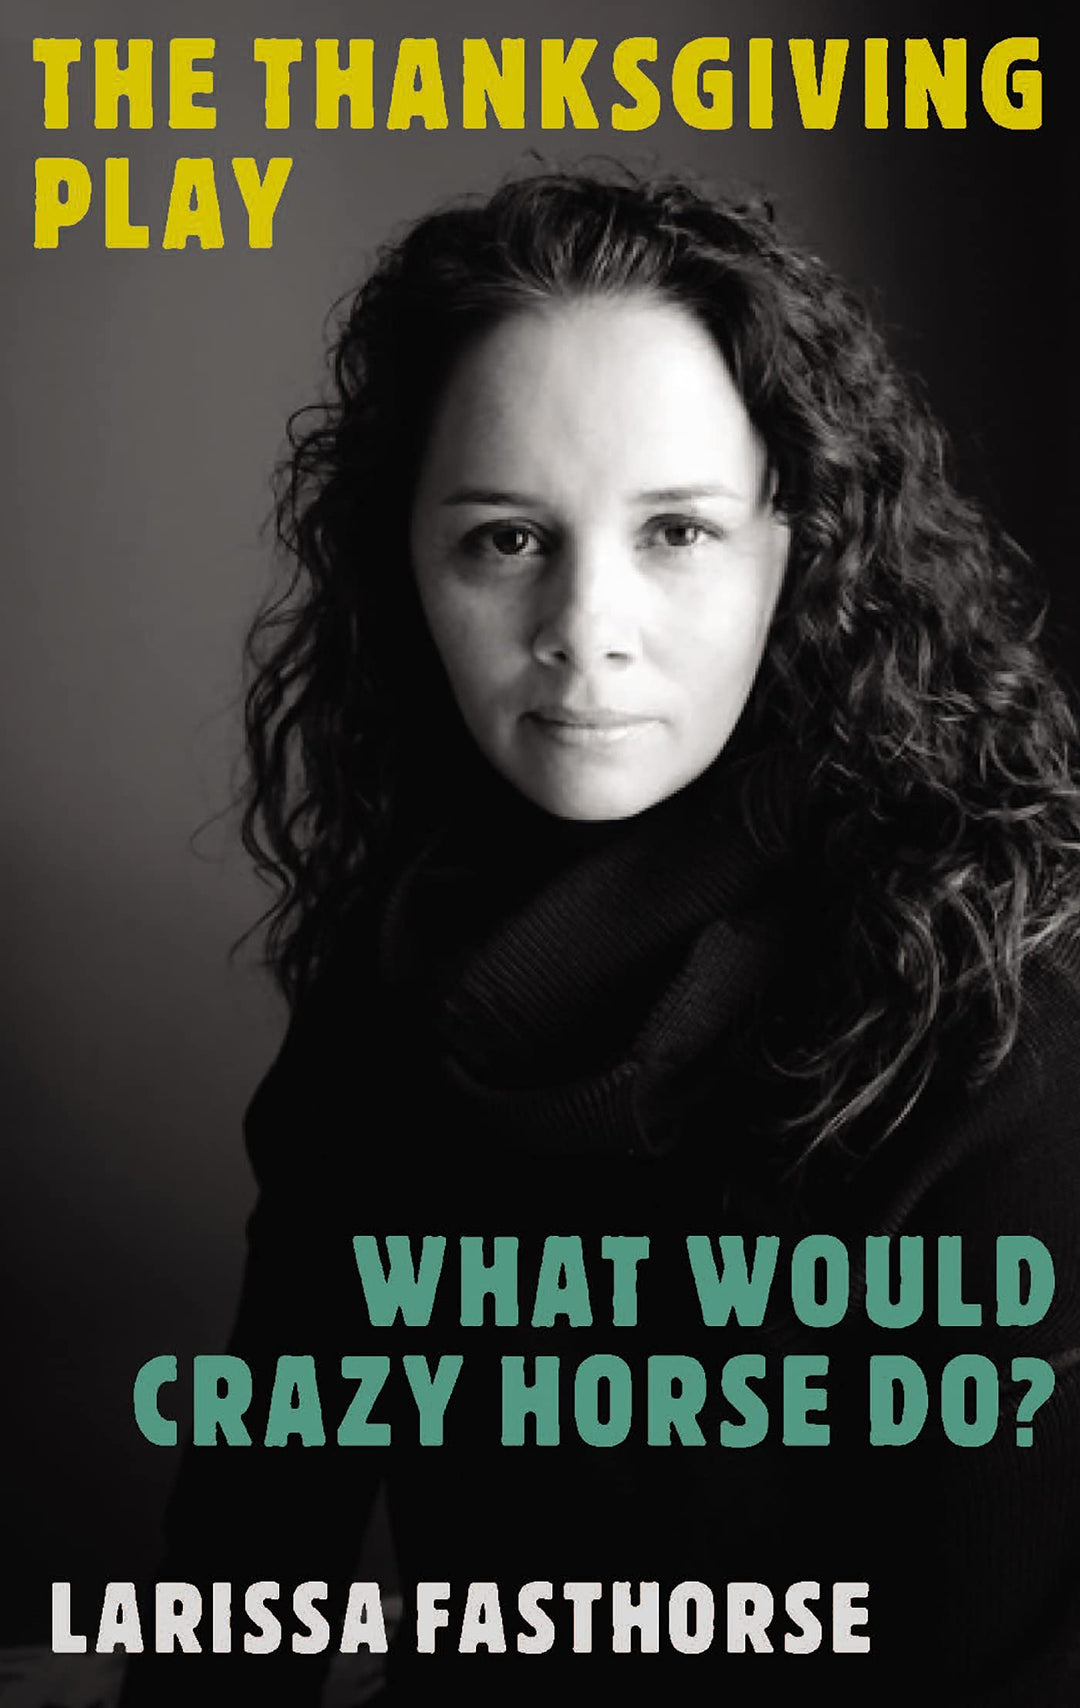 The Thanksgiving Play / What Would Crazy Horse Do? by Larissa Fasthorse